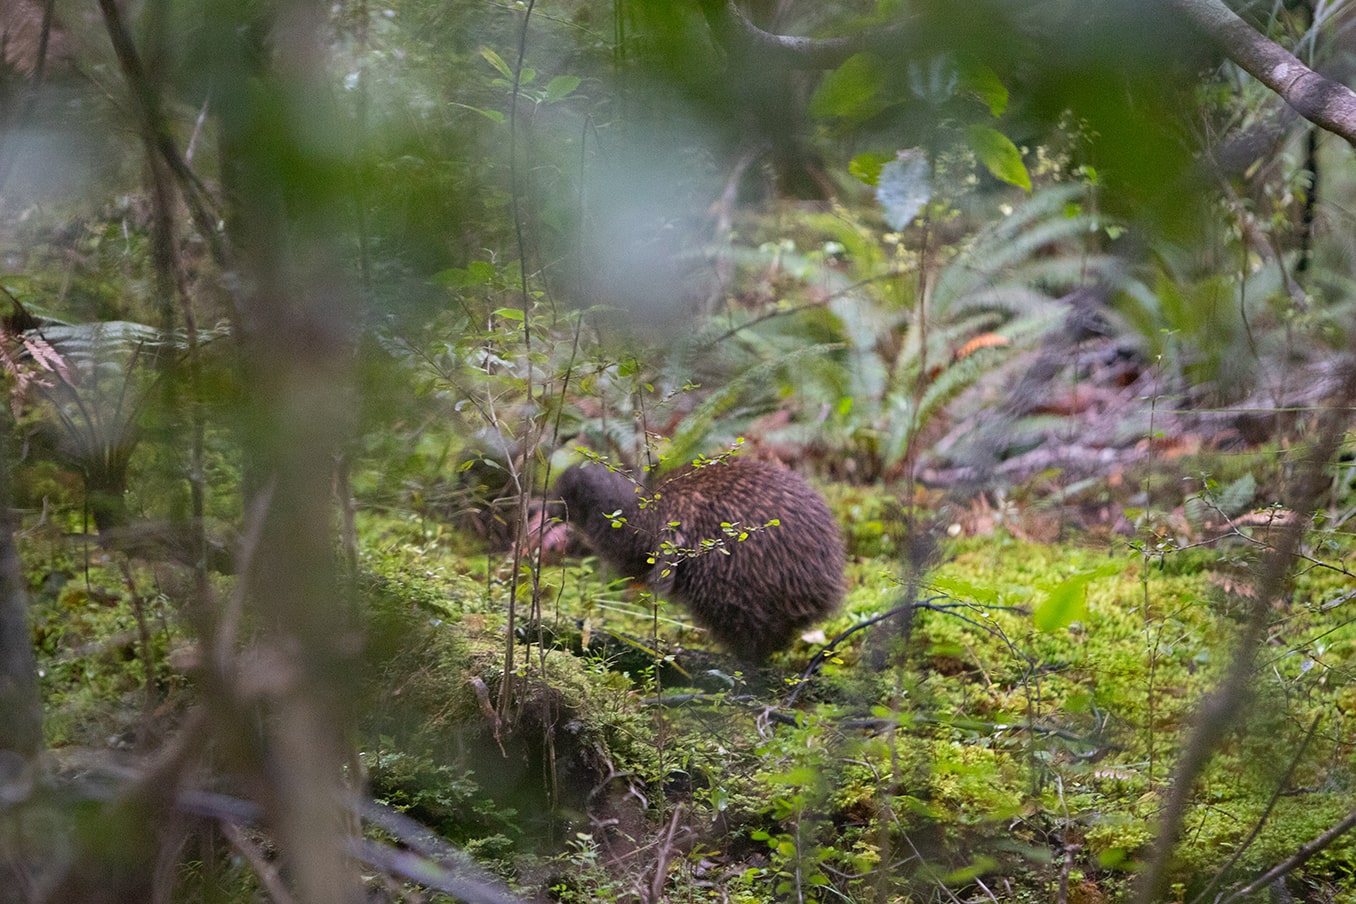 Kiwi in the wild, spotted on a Discovery Expedition